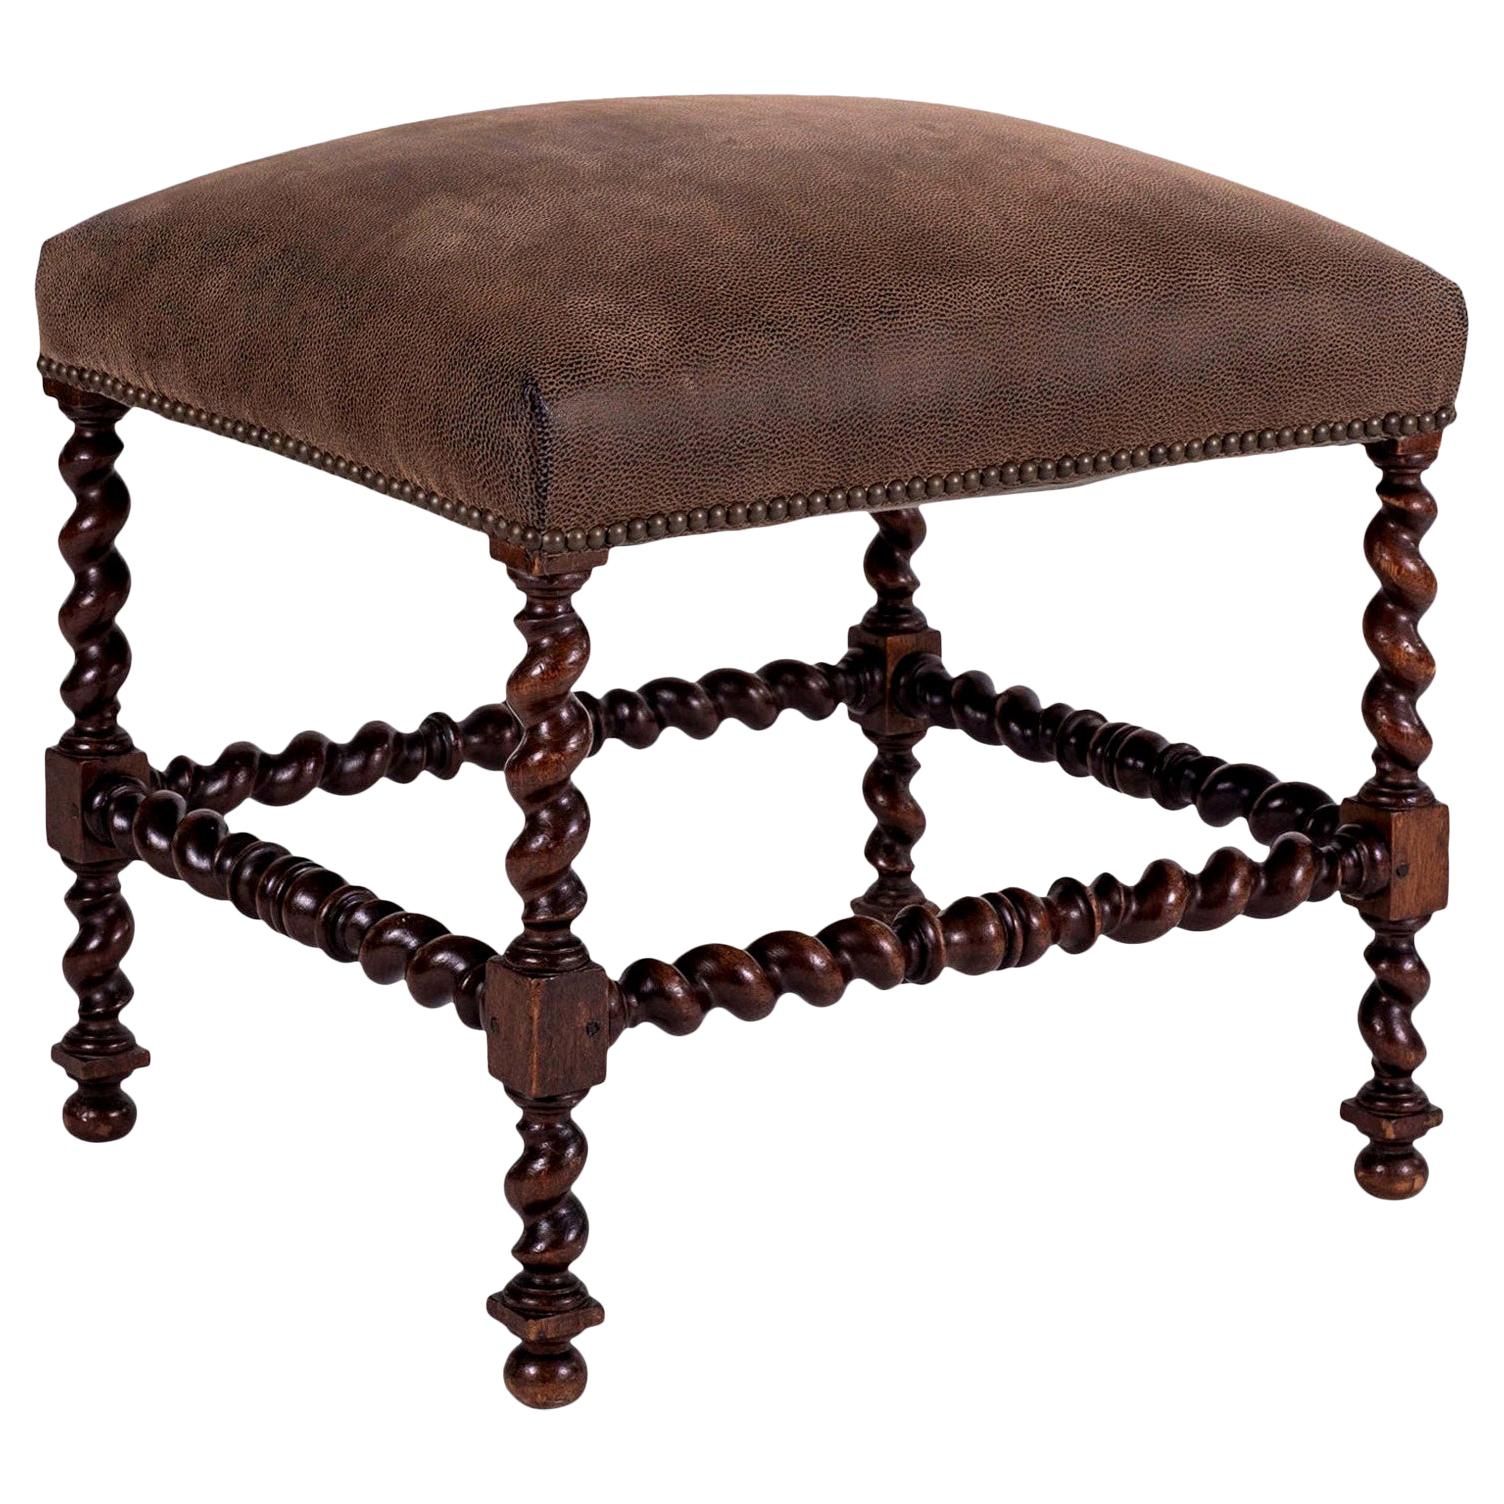 Leather-covered Louis XIII walnut stool dating to the 19th century. French stool hand carved in walnut. Barley-twist style legs and stretchers. Featuring mortise and tenon construction (evidence of joints tightened in the past). Covered in fine